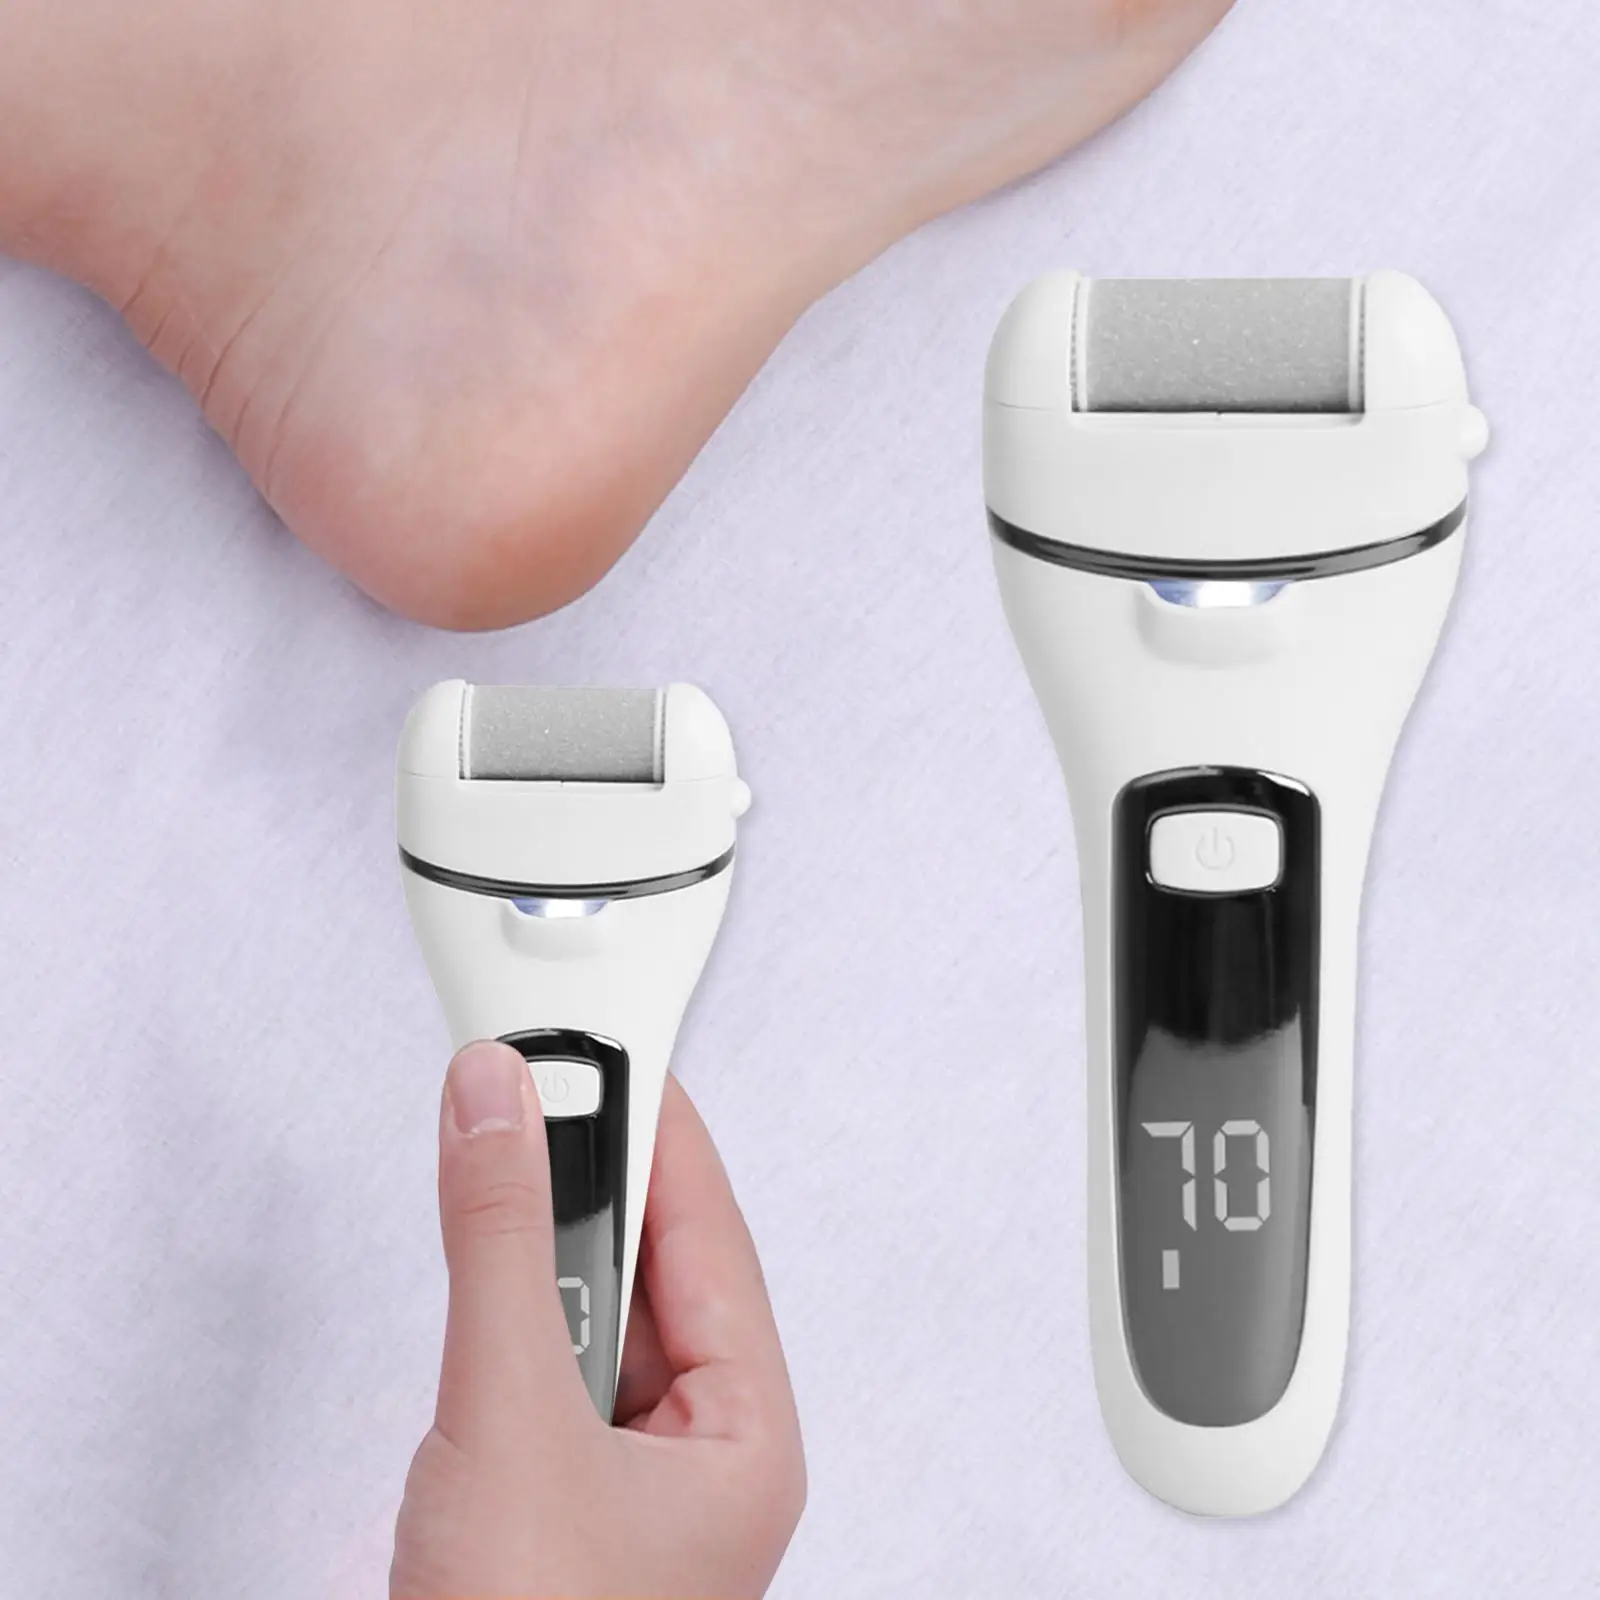 Portable Electric Feet Callus Remover Pedicure Kit with Roller Heads 1200mAh Foot File for Feet Care Feet Clean Men Women